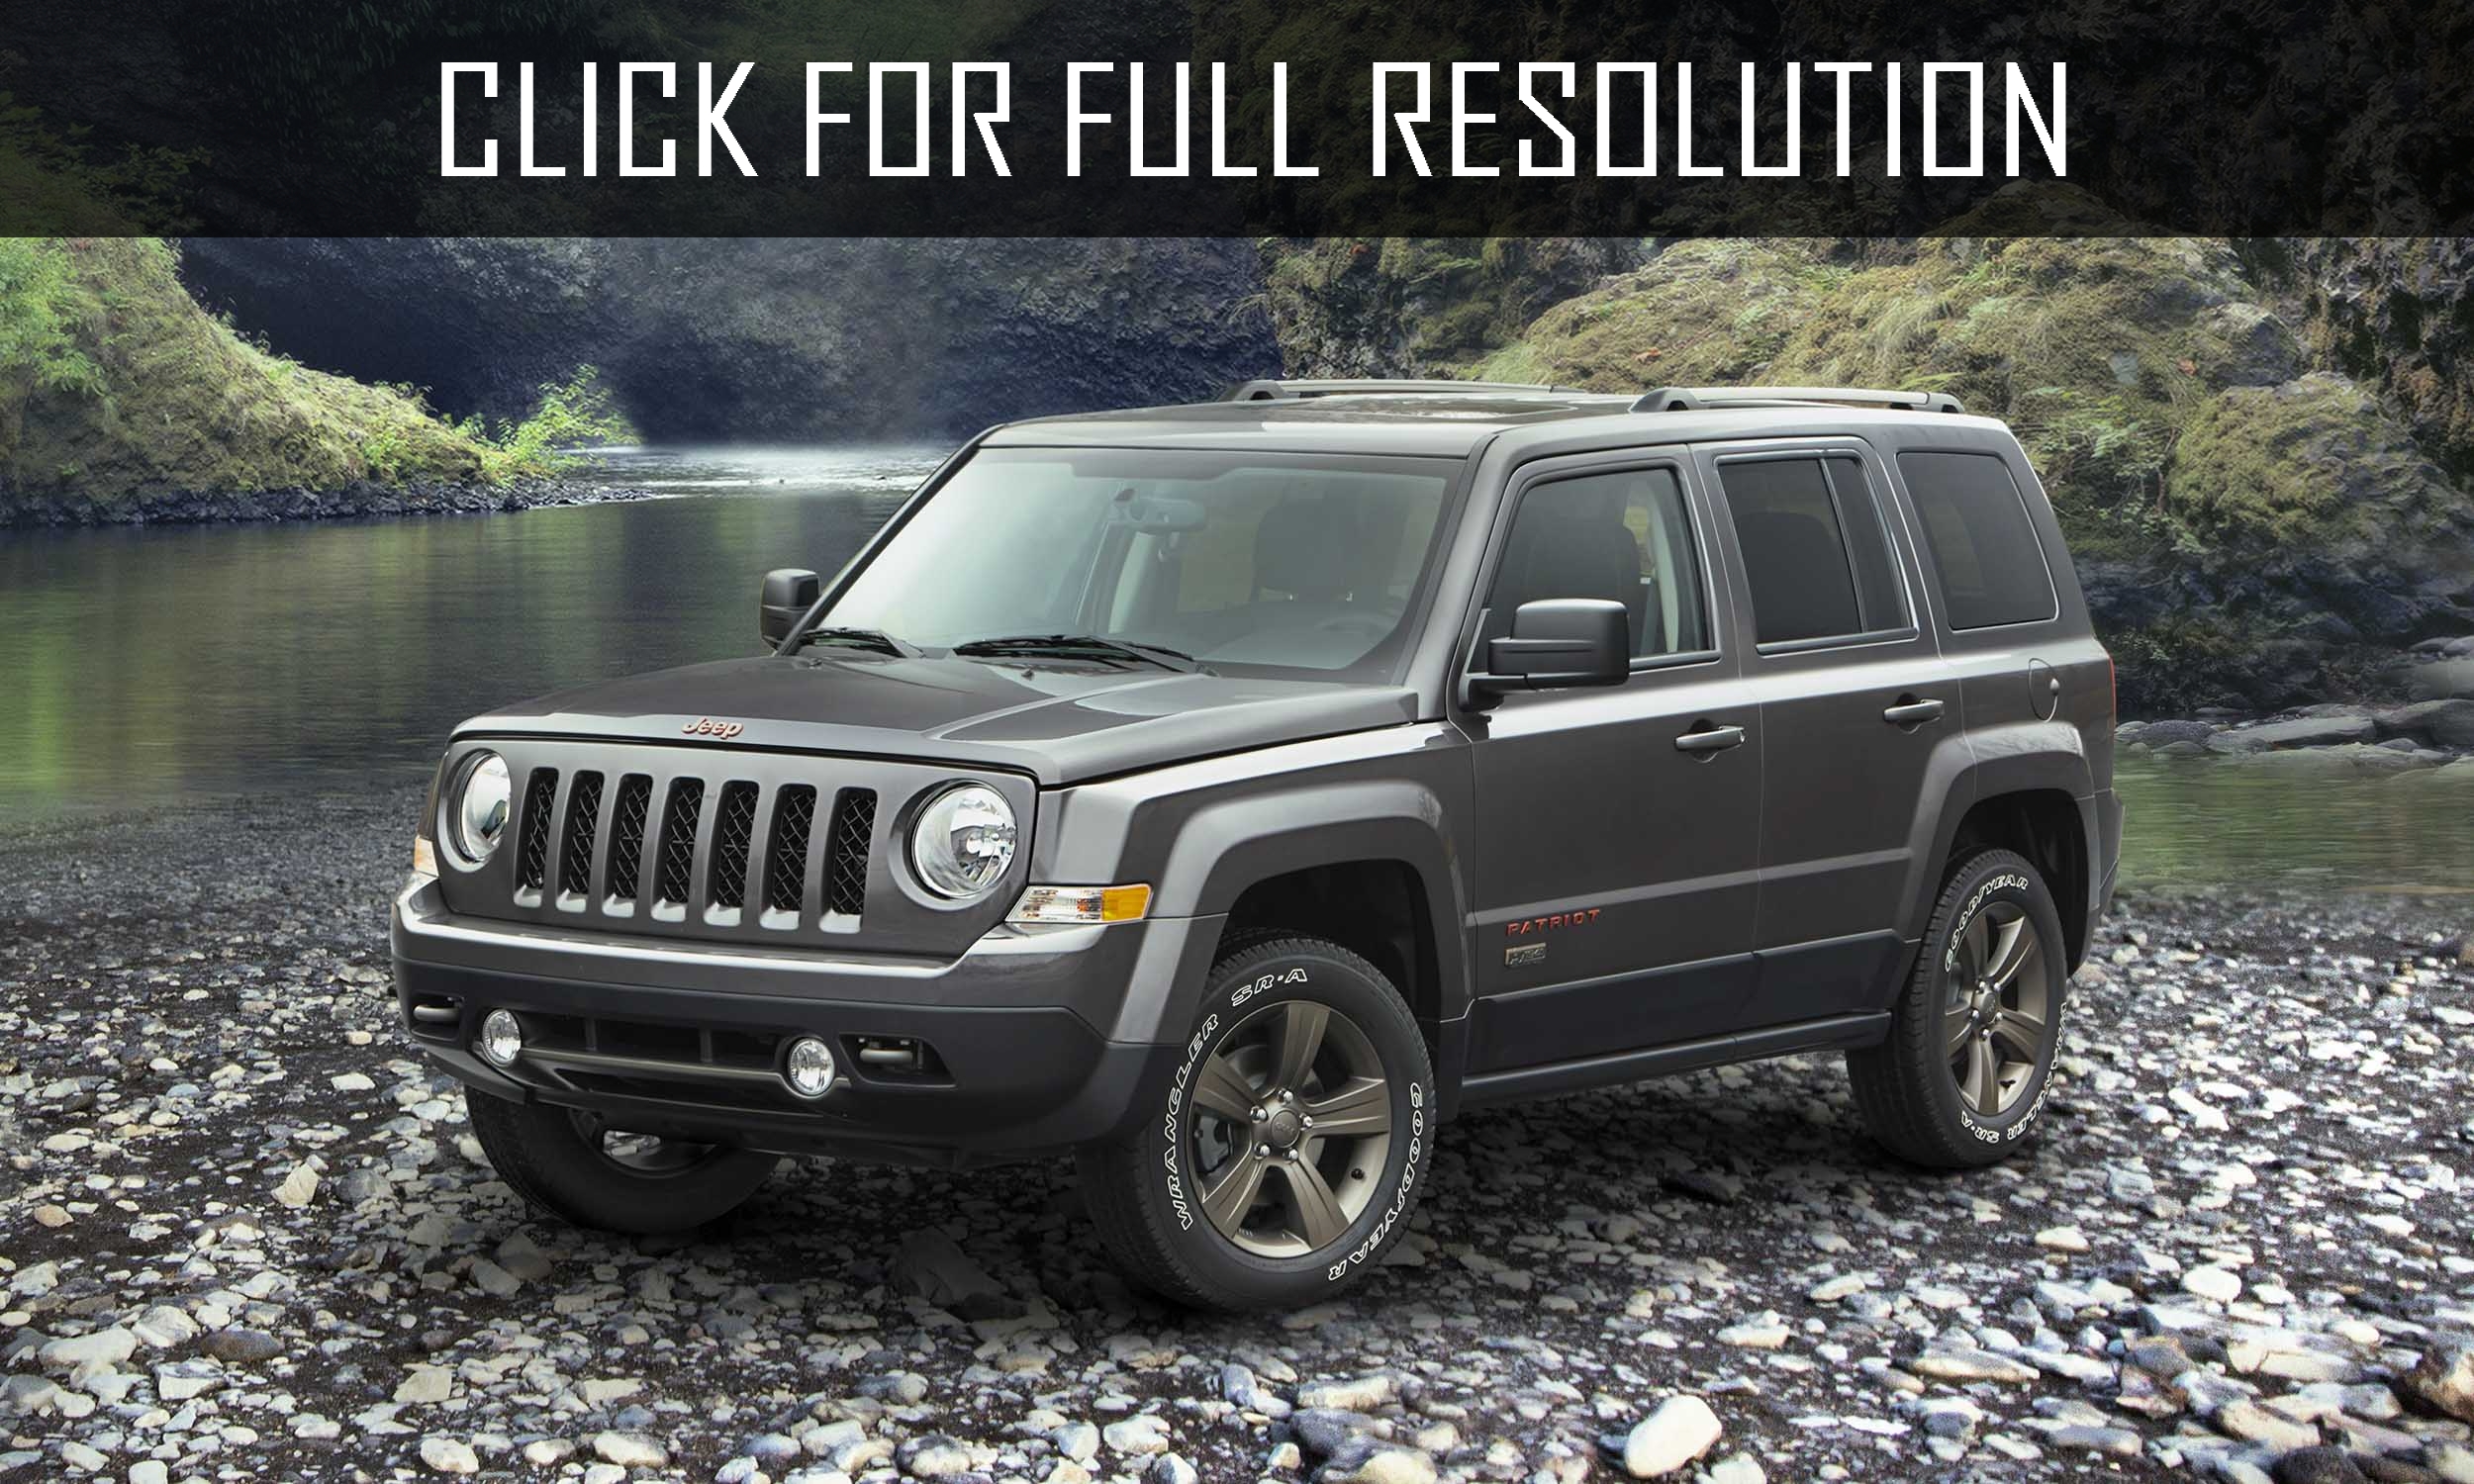 2008 Jeep Patriot Awd news, reviews, msrp, ratings with